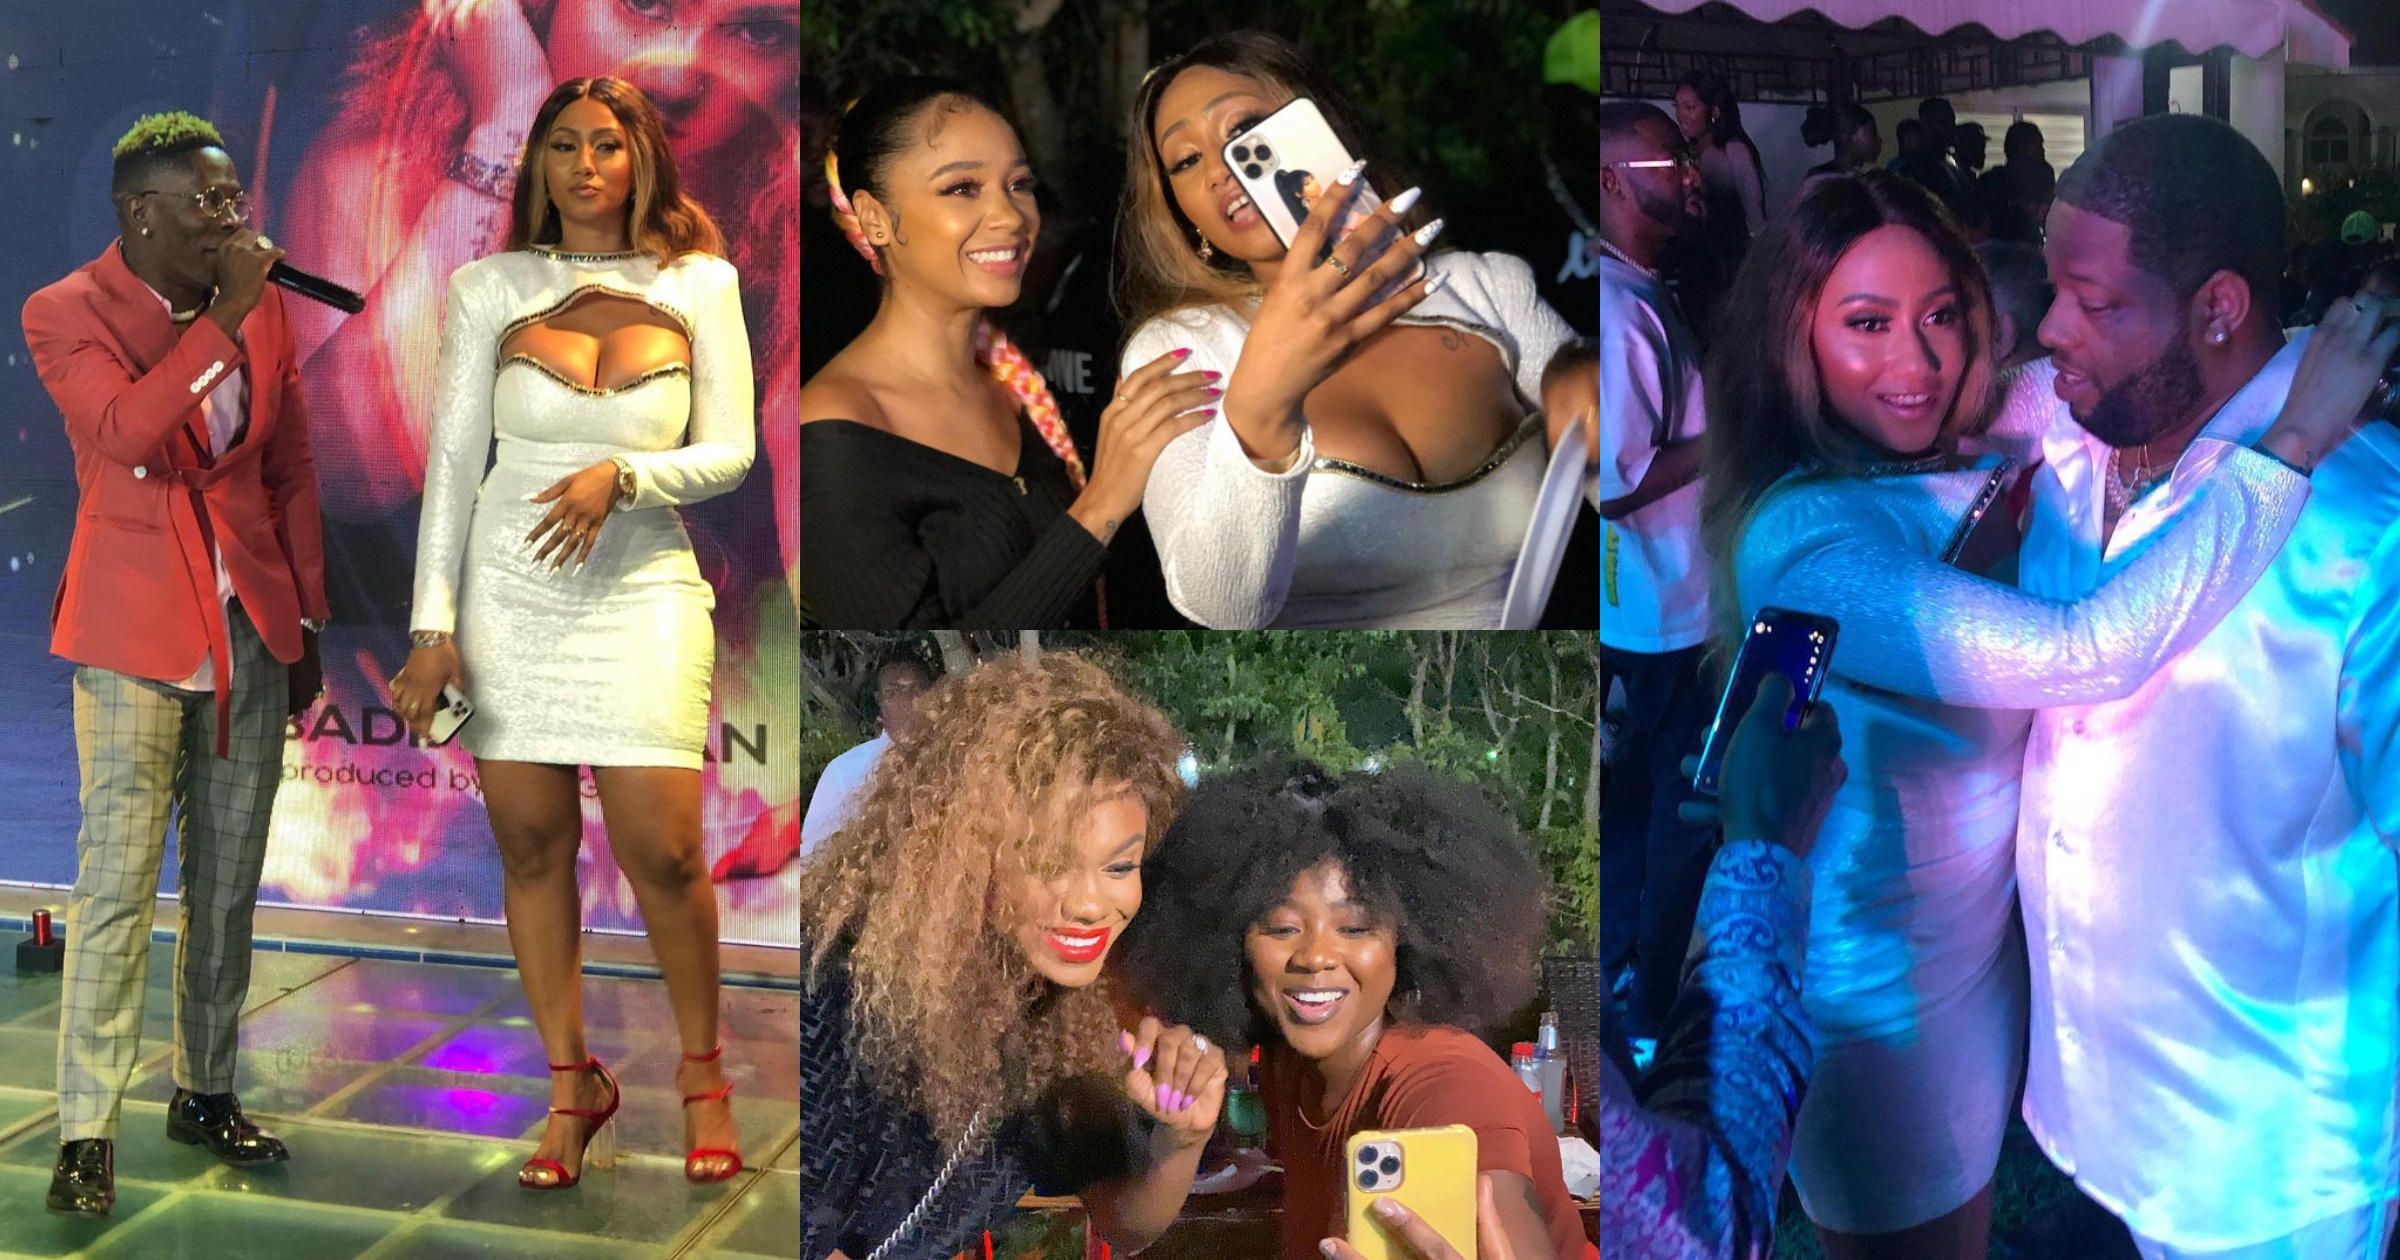 Hajia4Real: Shatta Wale, Efia Odo, Becca, Efya, others attend Badder Than party (videos)